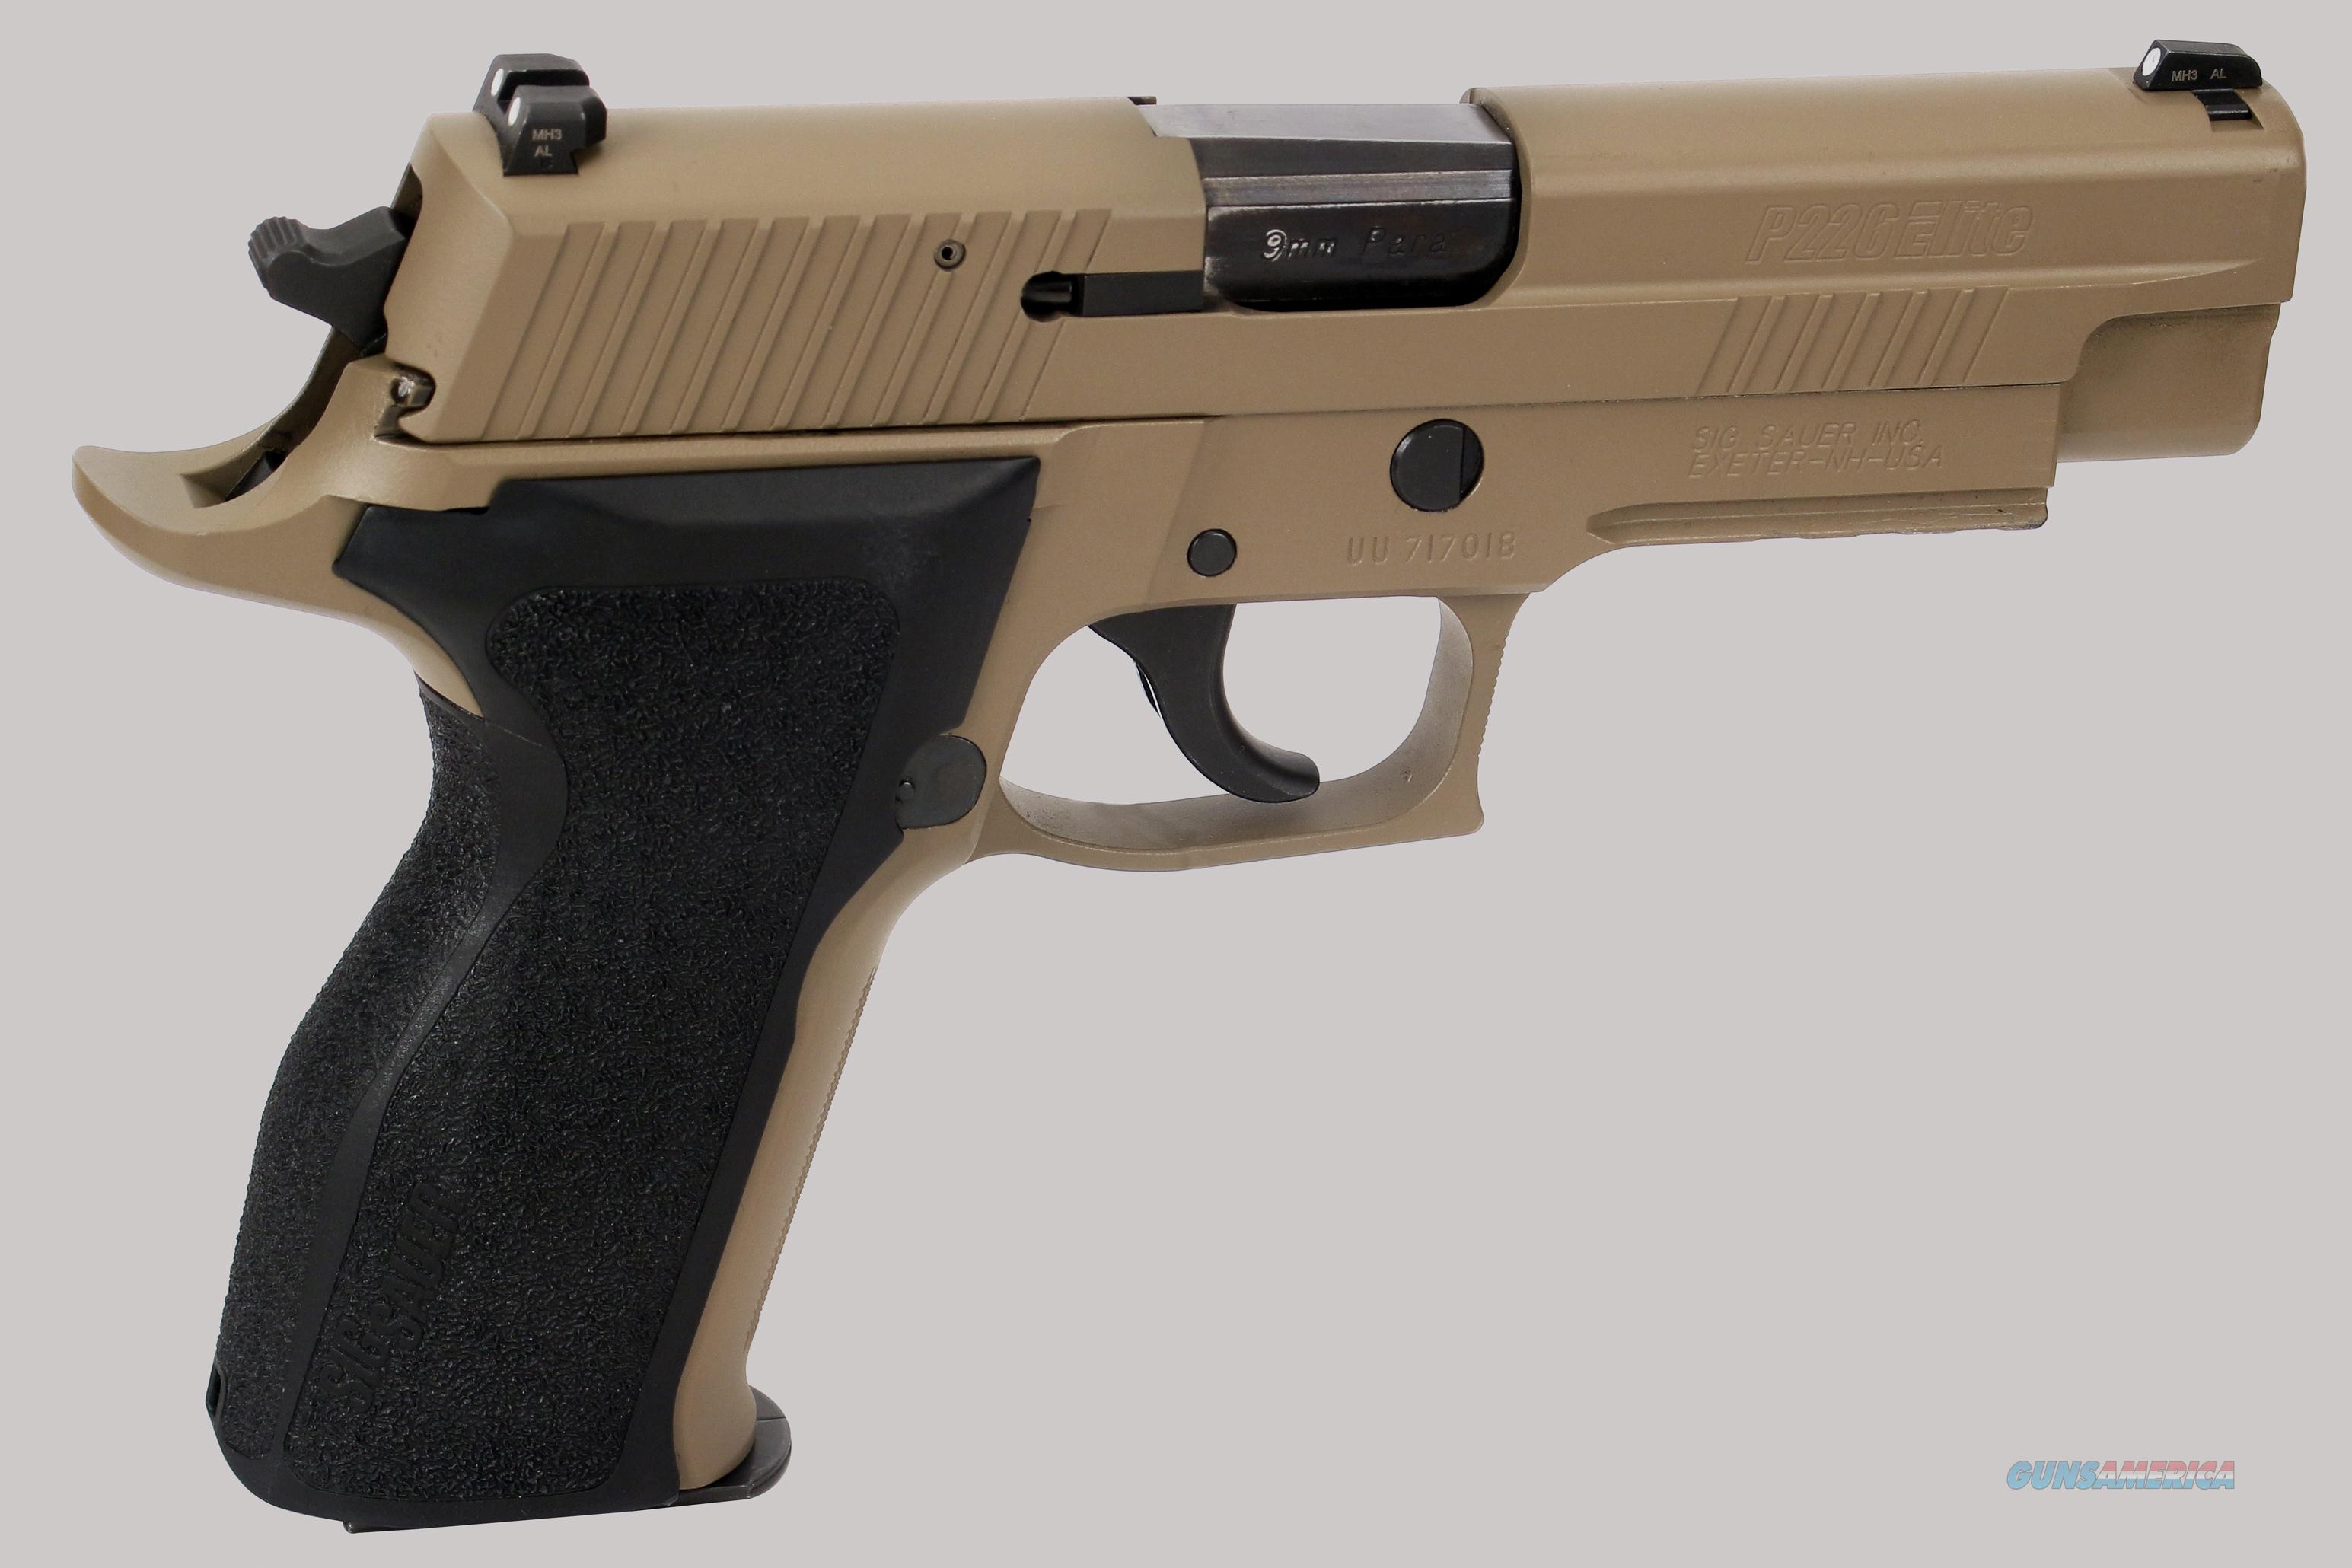 Sig Sauer P226 9mm Pistol For Sale At 956659942 9777